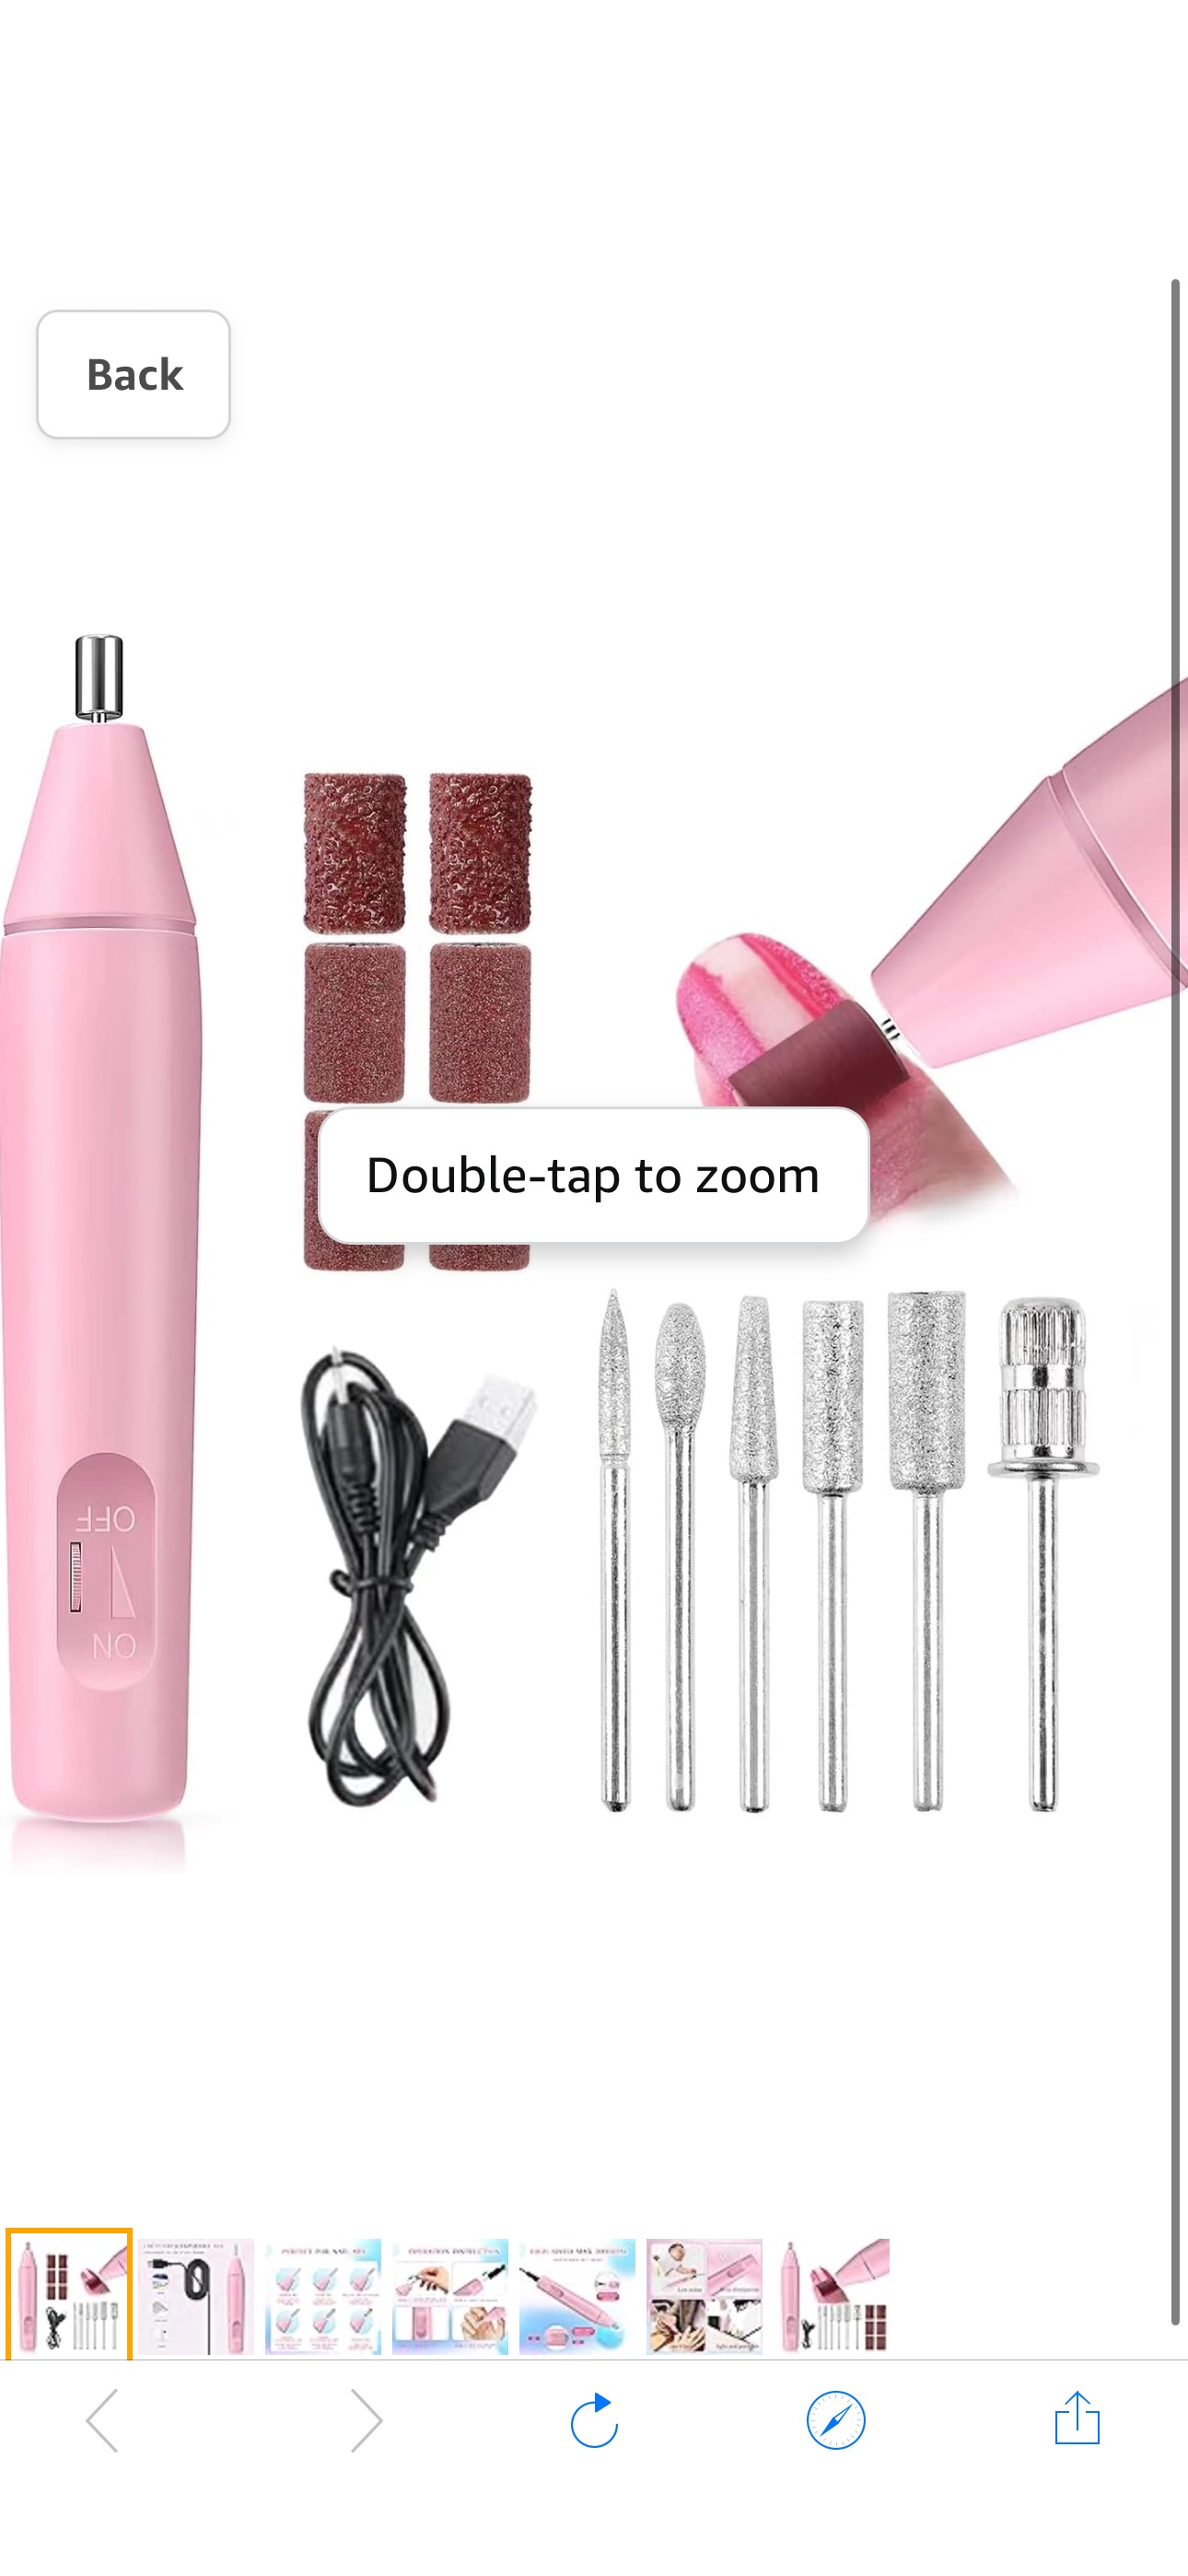 Amazon.com: Portable Electric Nail Drill Set,Upgraded Professional Nail File With 6 Pieces Changeable Drills And Sand Bands Tool,USB Speed switch,Machine Electric Nail File for Home Salon Use（Red） : B